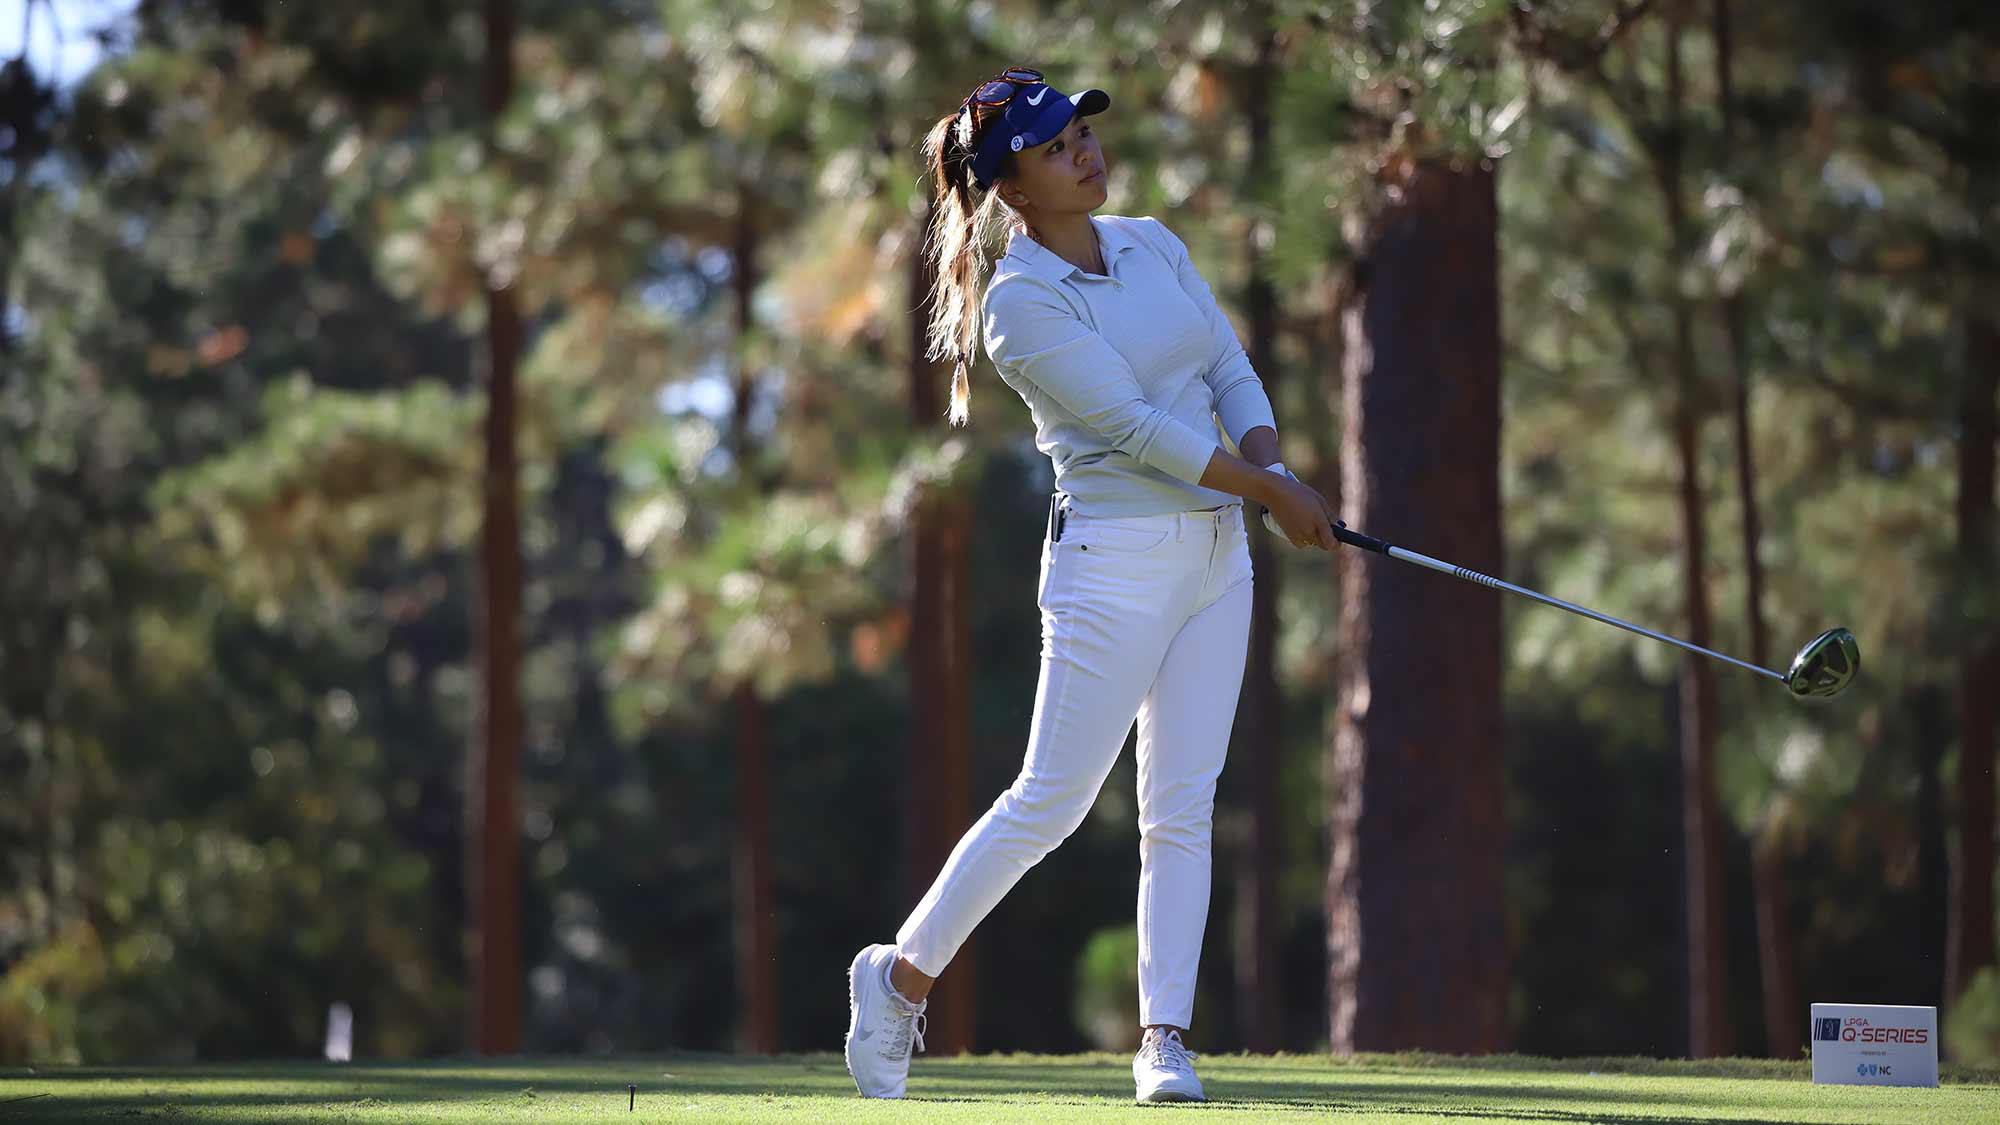 Brianna Do hits a tee shot during the first round of the 2019 LPGA Q-Series at Pinehurst Resort